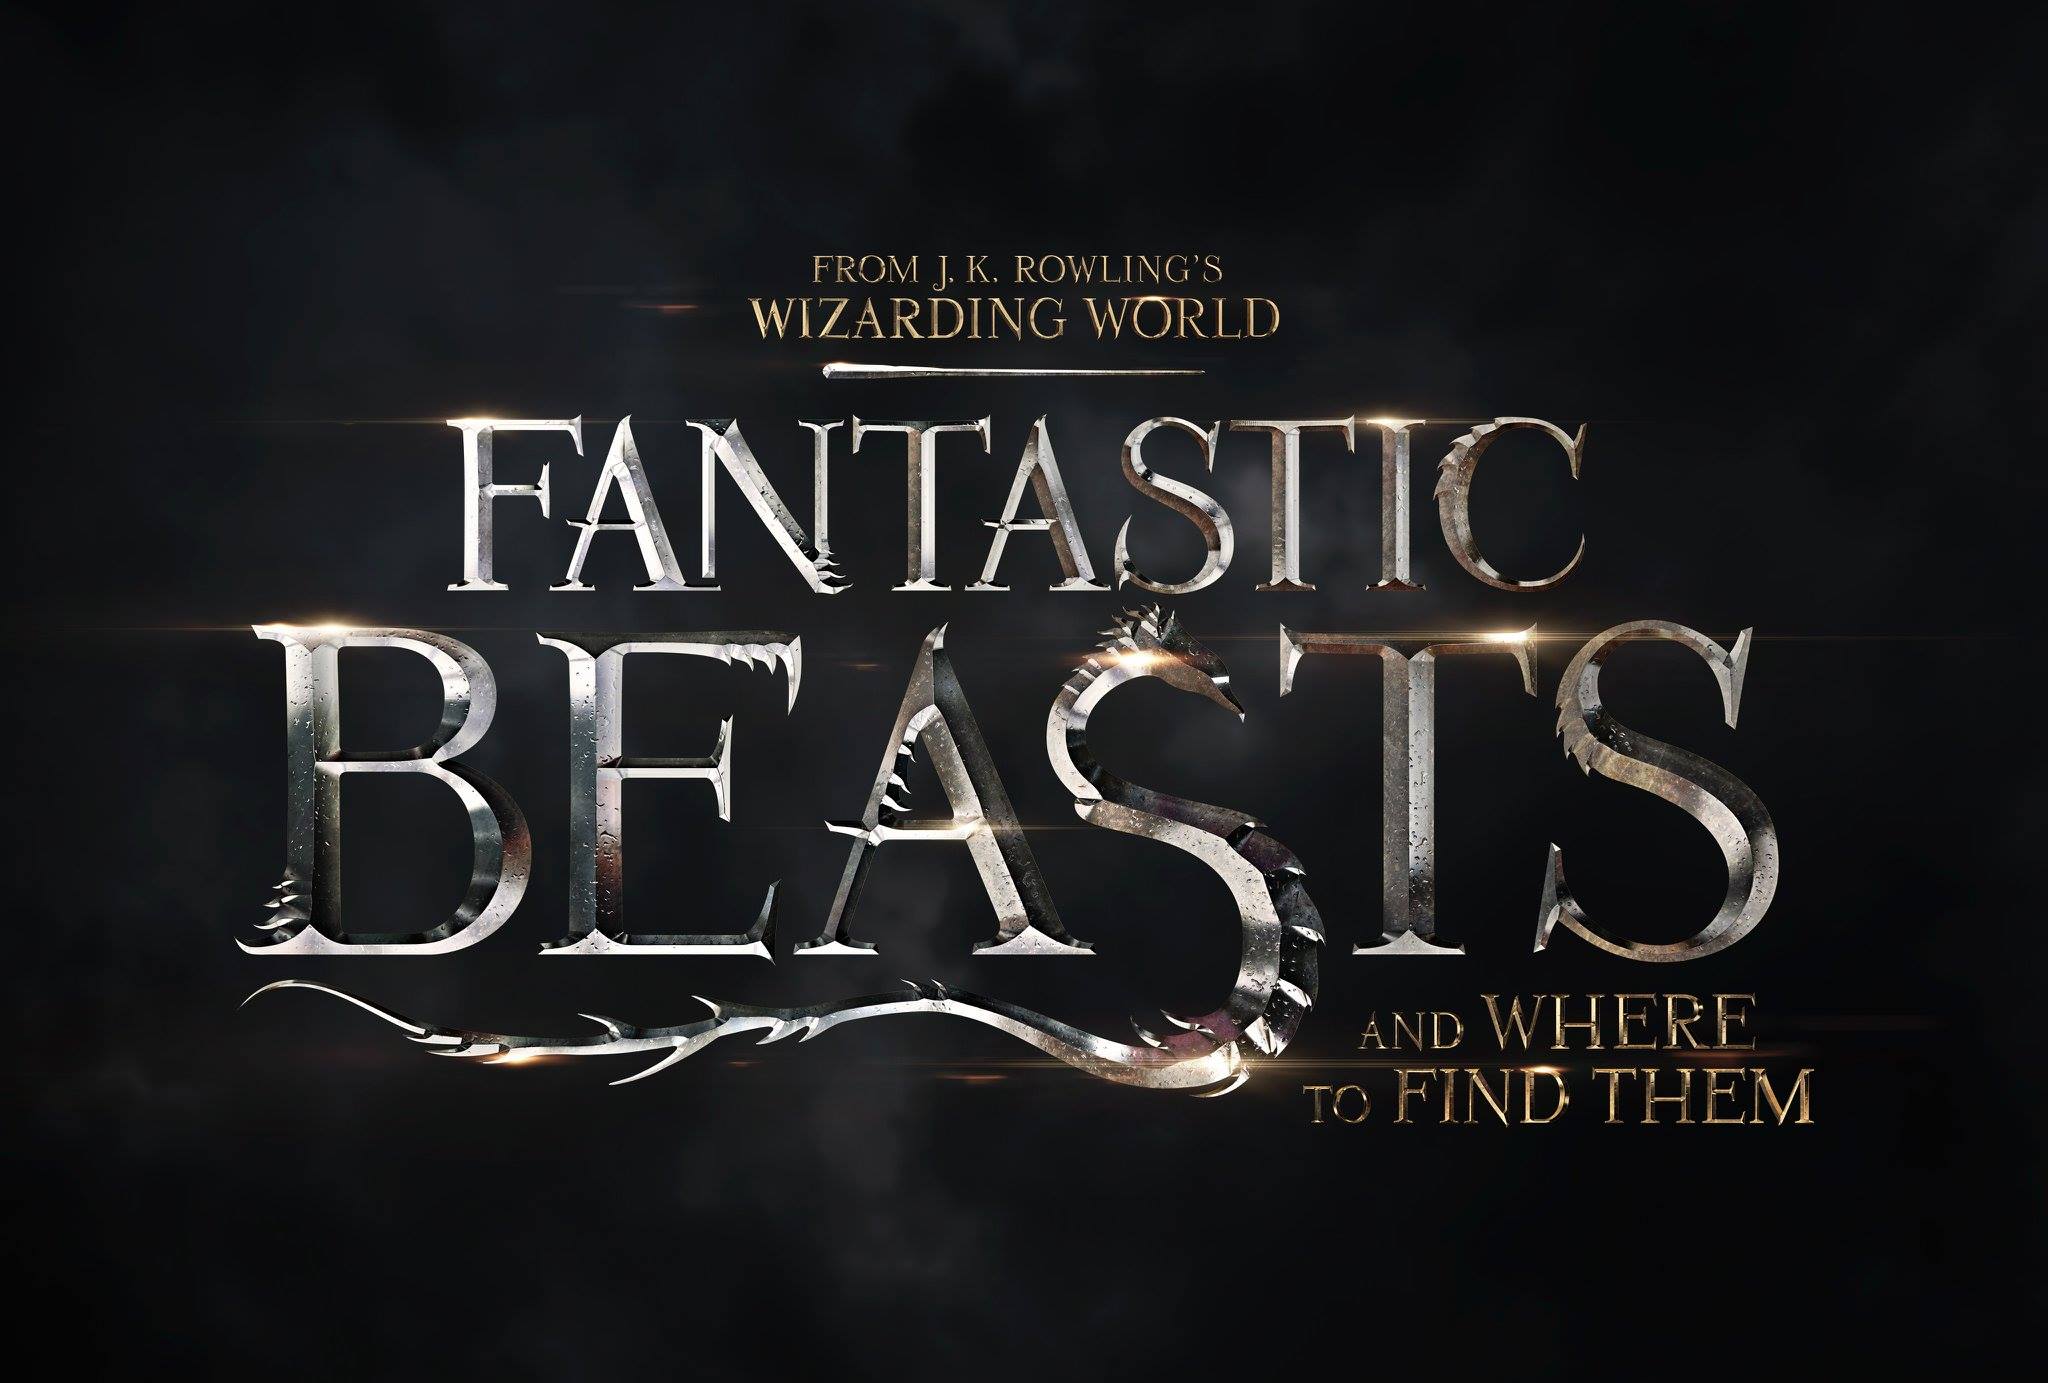 ‘Fantastic Beasts And Where To Find Them’ Is A Bland Film For Hufflepuffs